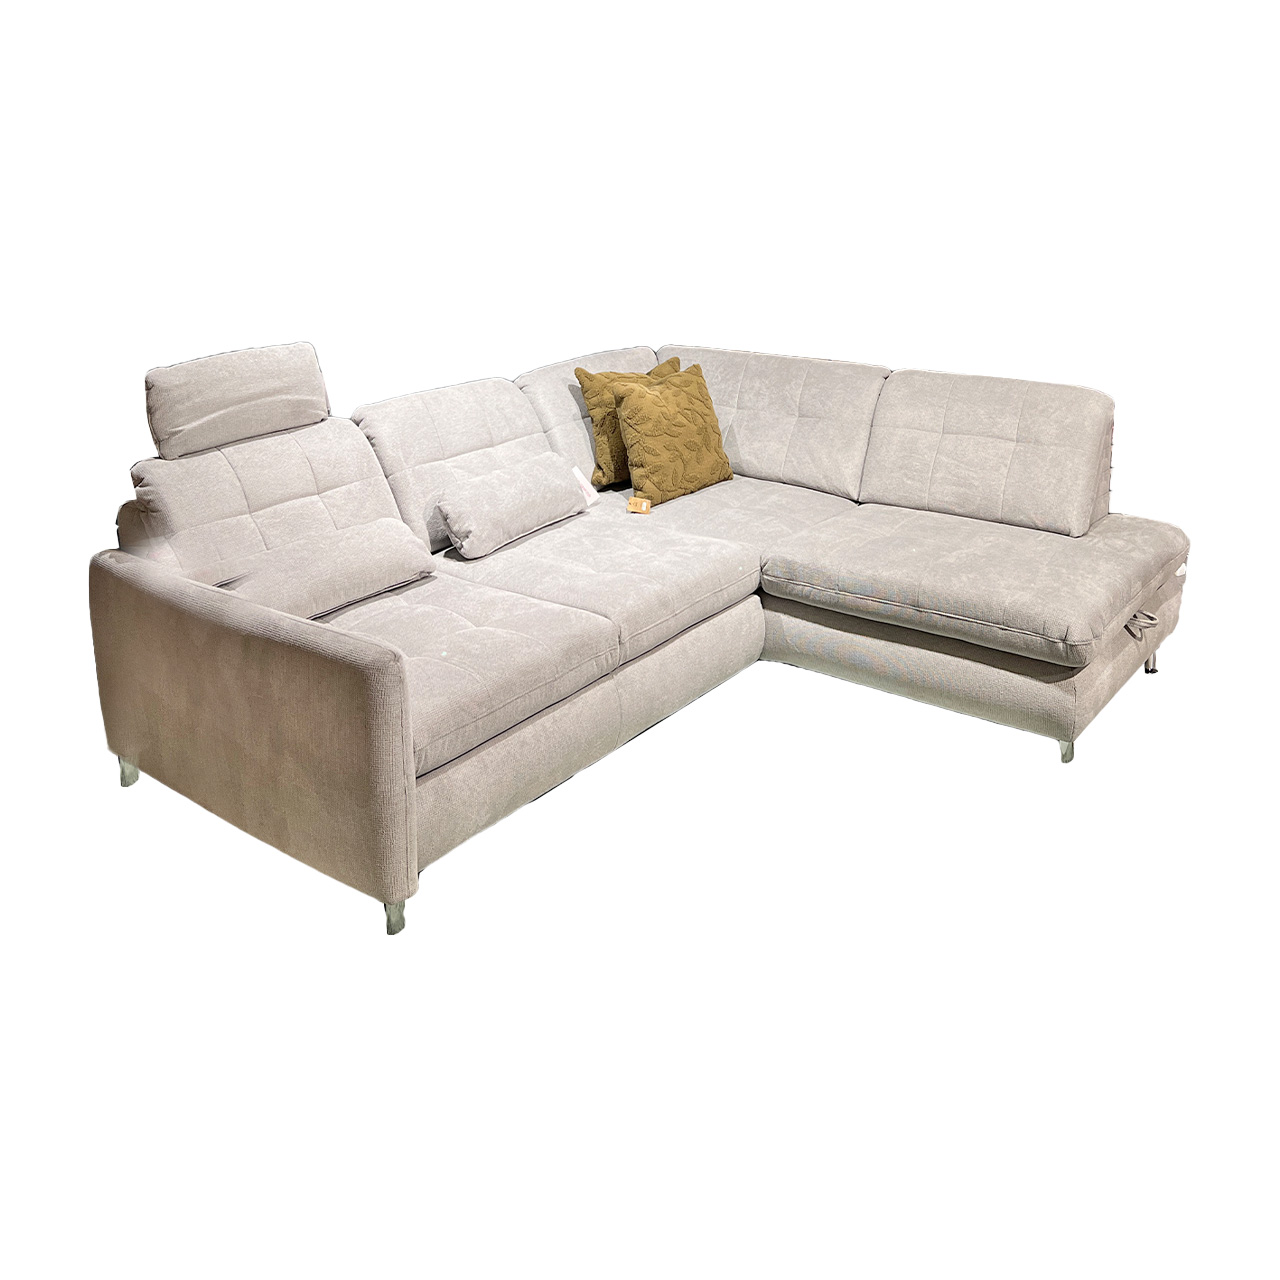 3C Candy Cord Sofa Upper East - Farbe: Weiß | Modell: Longchair links